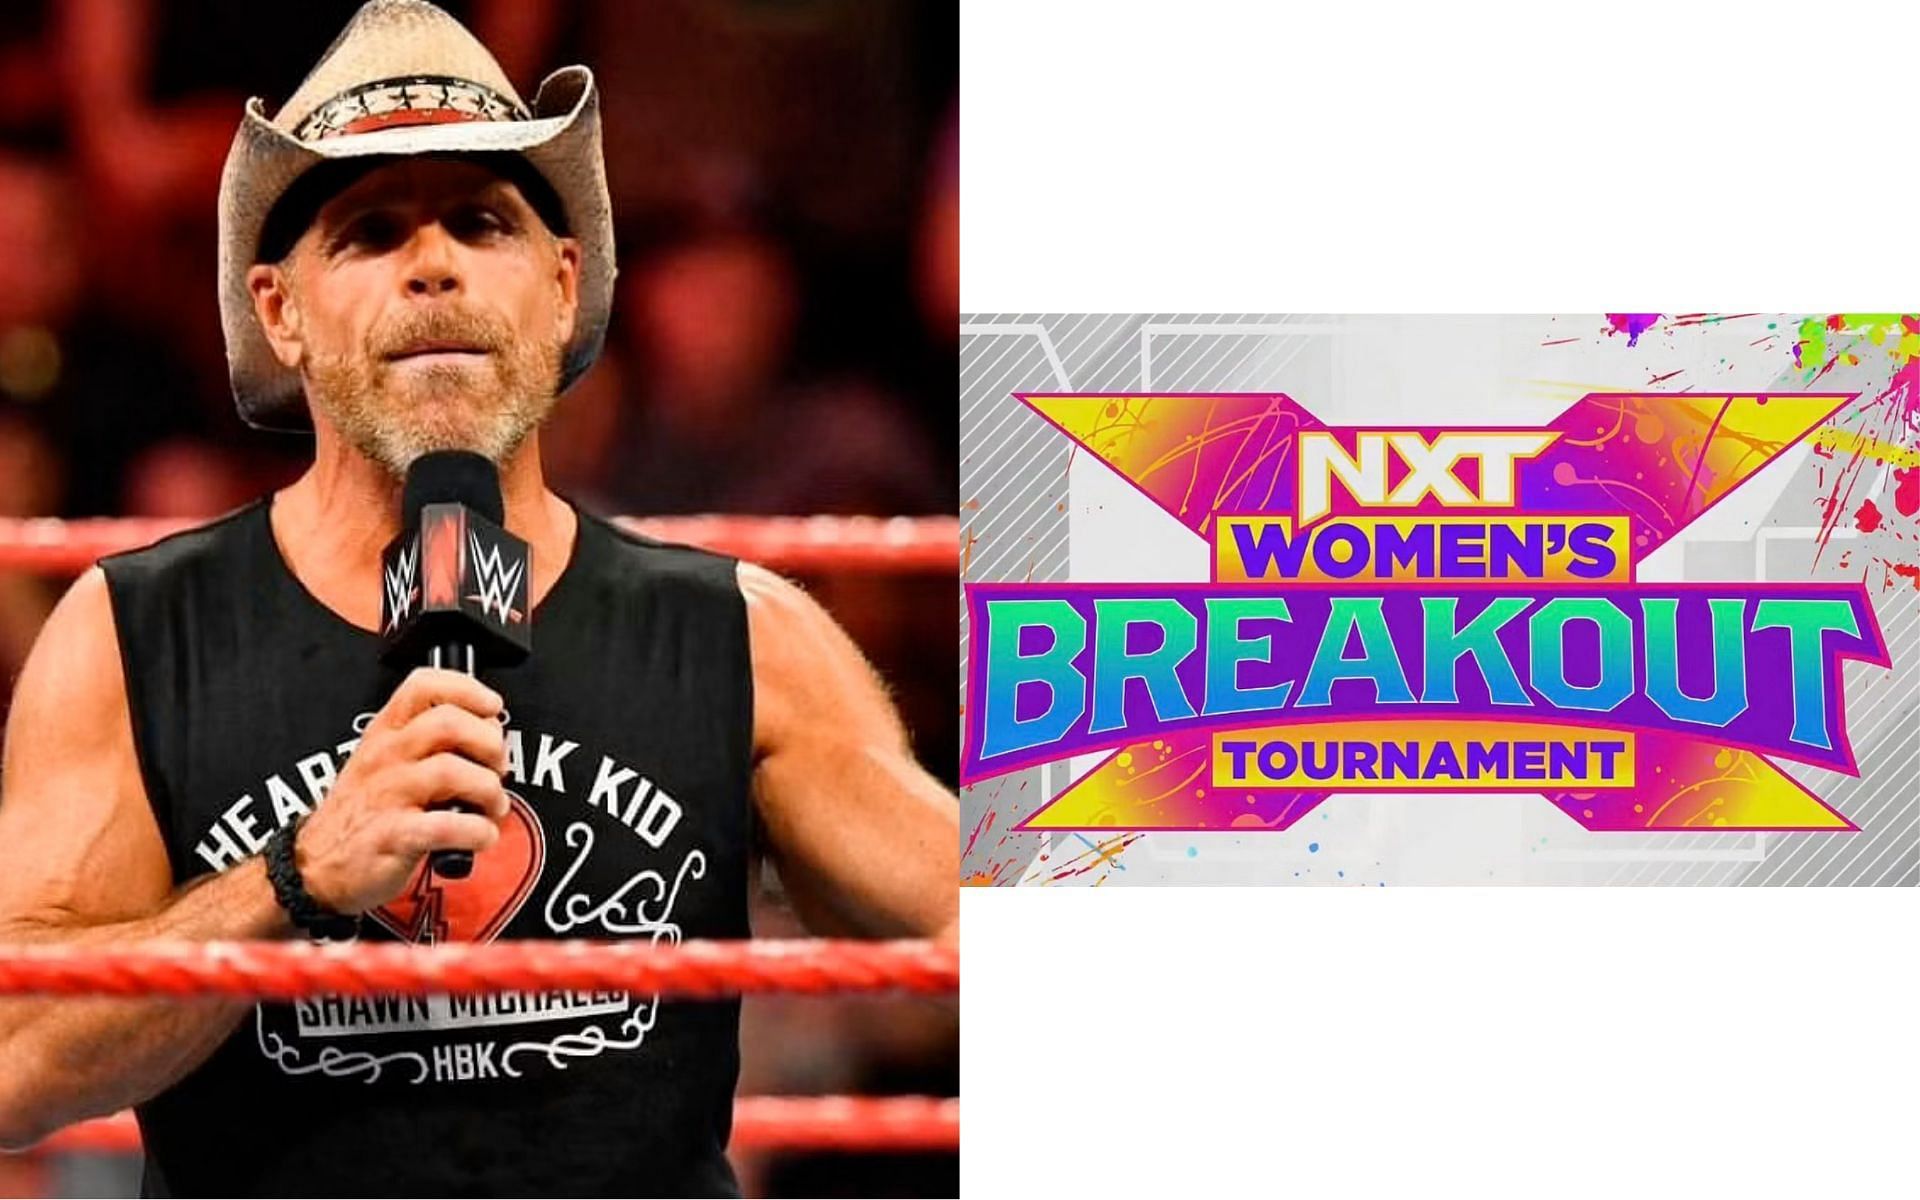 Shawn Michaels is a backstage mentor and booker on NXT